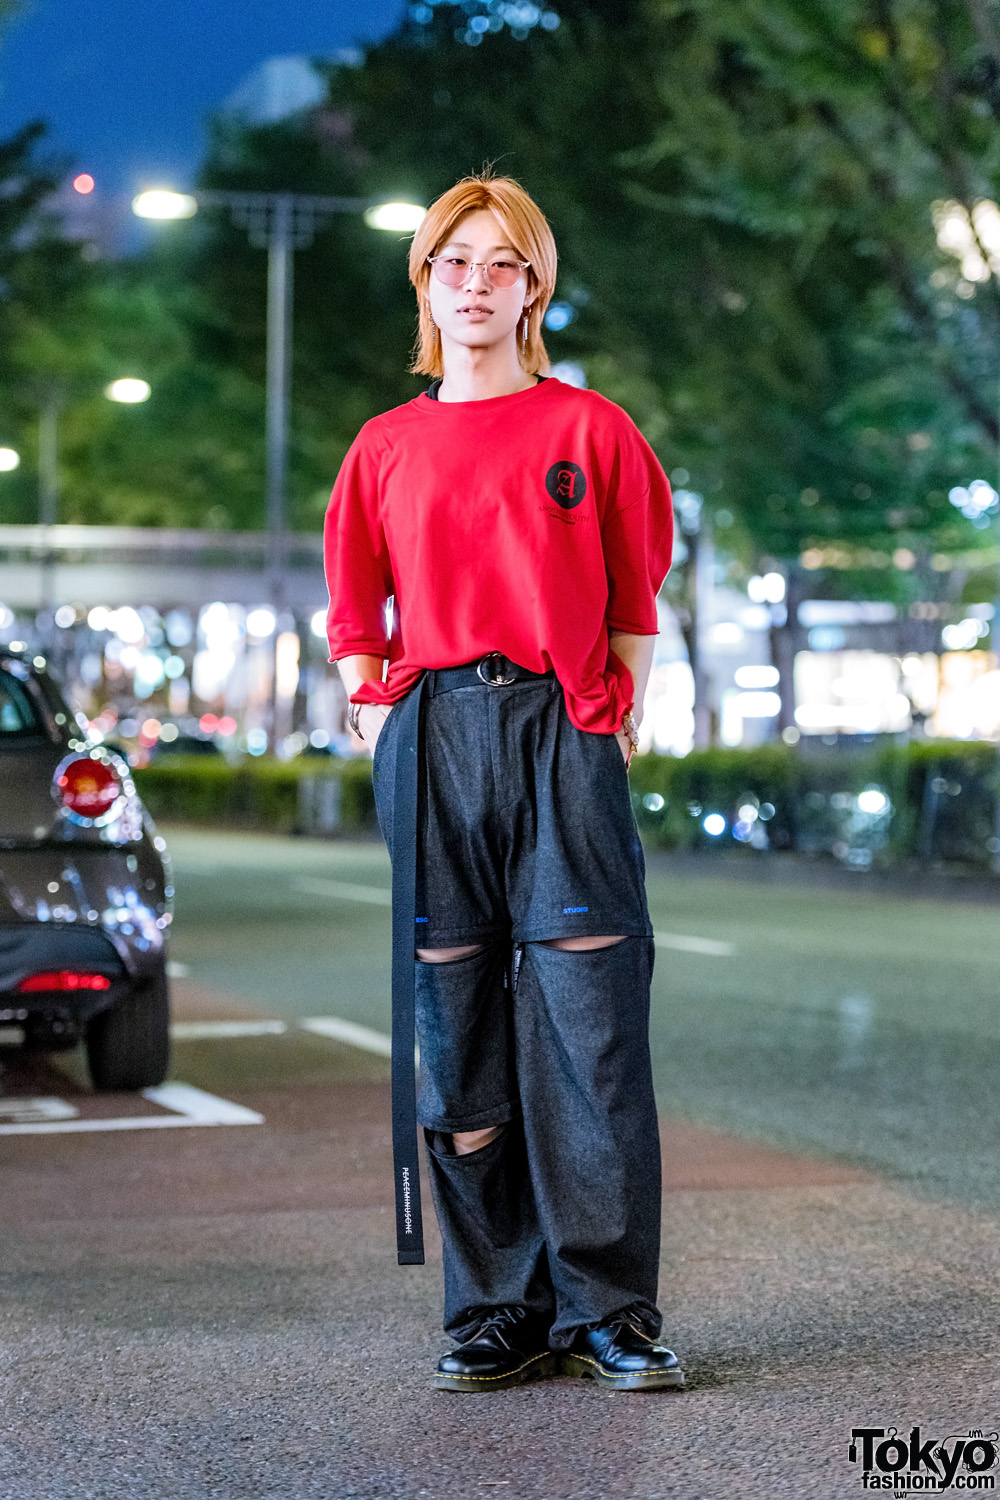 Japanese Hair Stylist's Street Style w/ Orange Shaggy Hair, Another Youth T-Shirt, ESC Studio Cutout Pants & Dr. Martens Boots